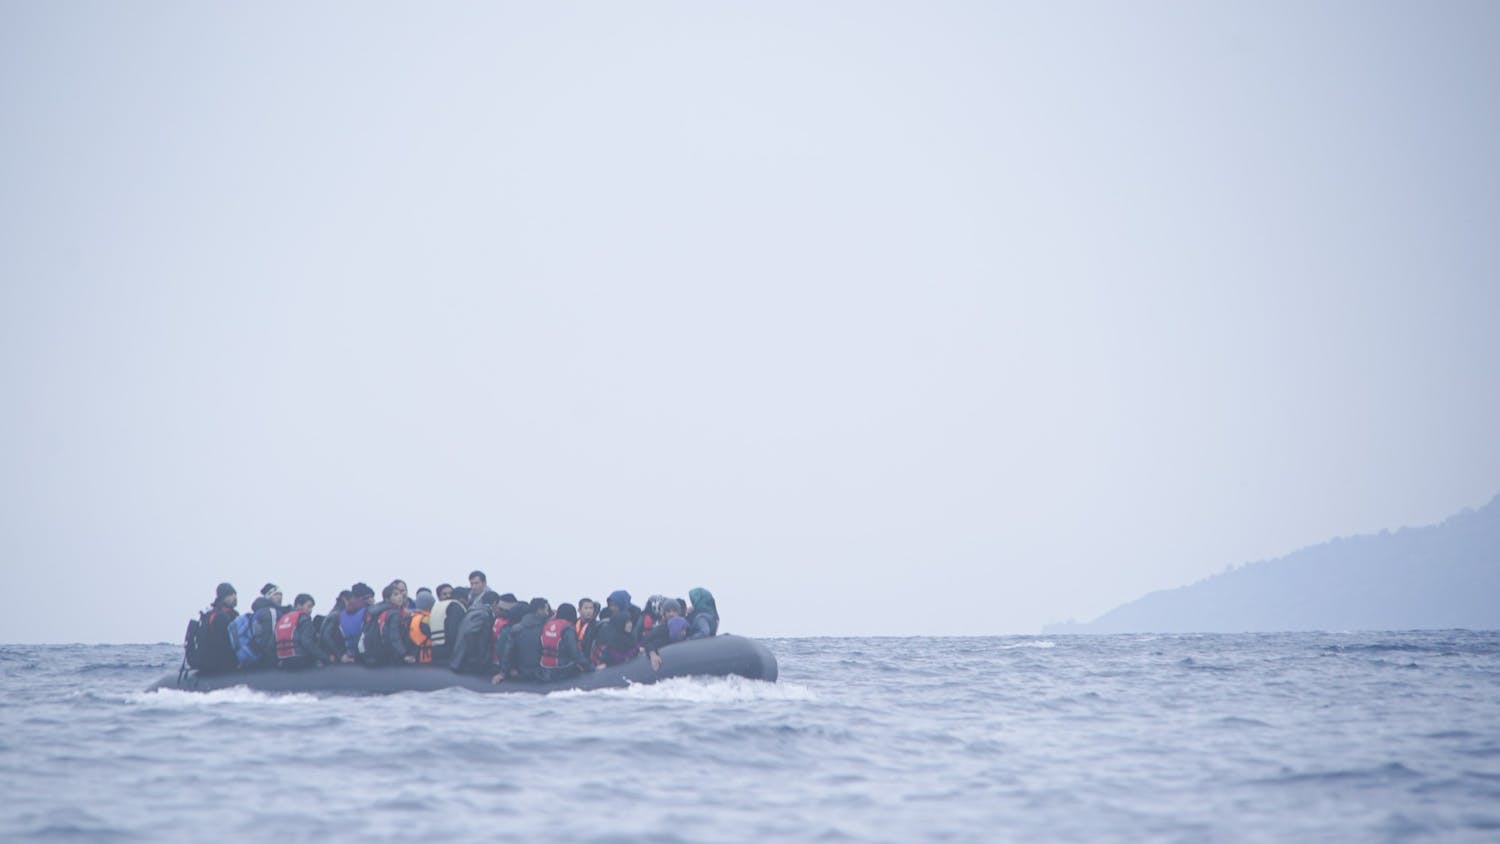 Refugees_on_a_boat_crossing_the_Mediterranean_sea,_heading_from_Turkish_coast_to_the_northeastern_Greek_island_of_Lesbos,_29_January_2016.jpg